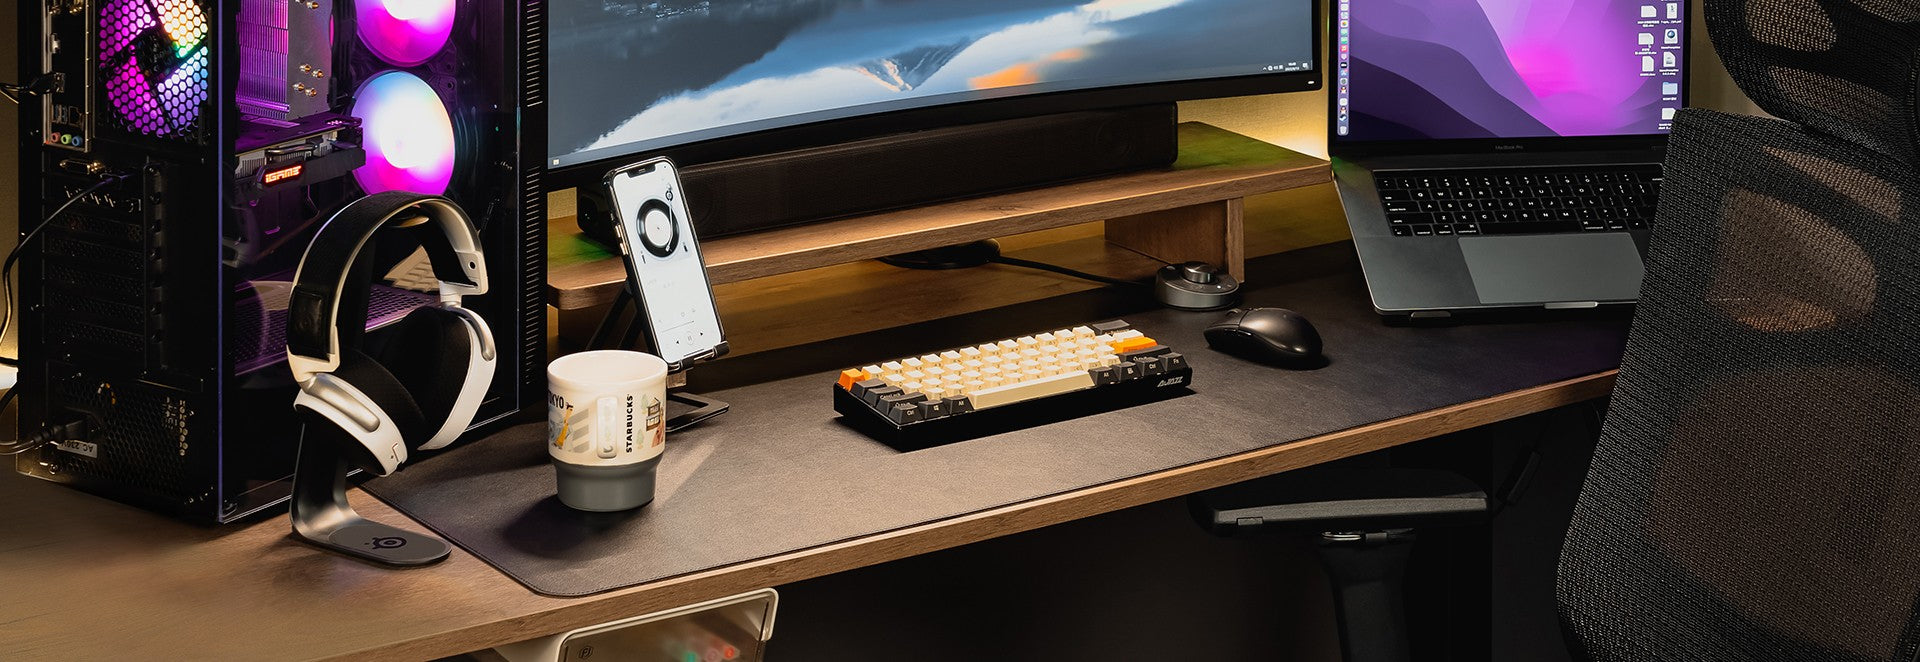 mage showcasing a modern desk setup with Flujo accessories, including a phone stand and keyboard, set against a backdrop of a gaming PC and a monitor.